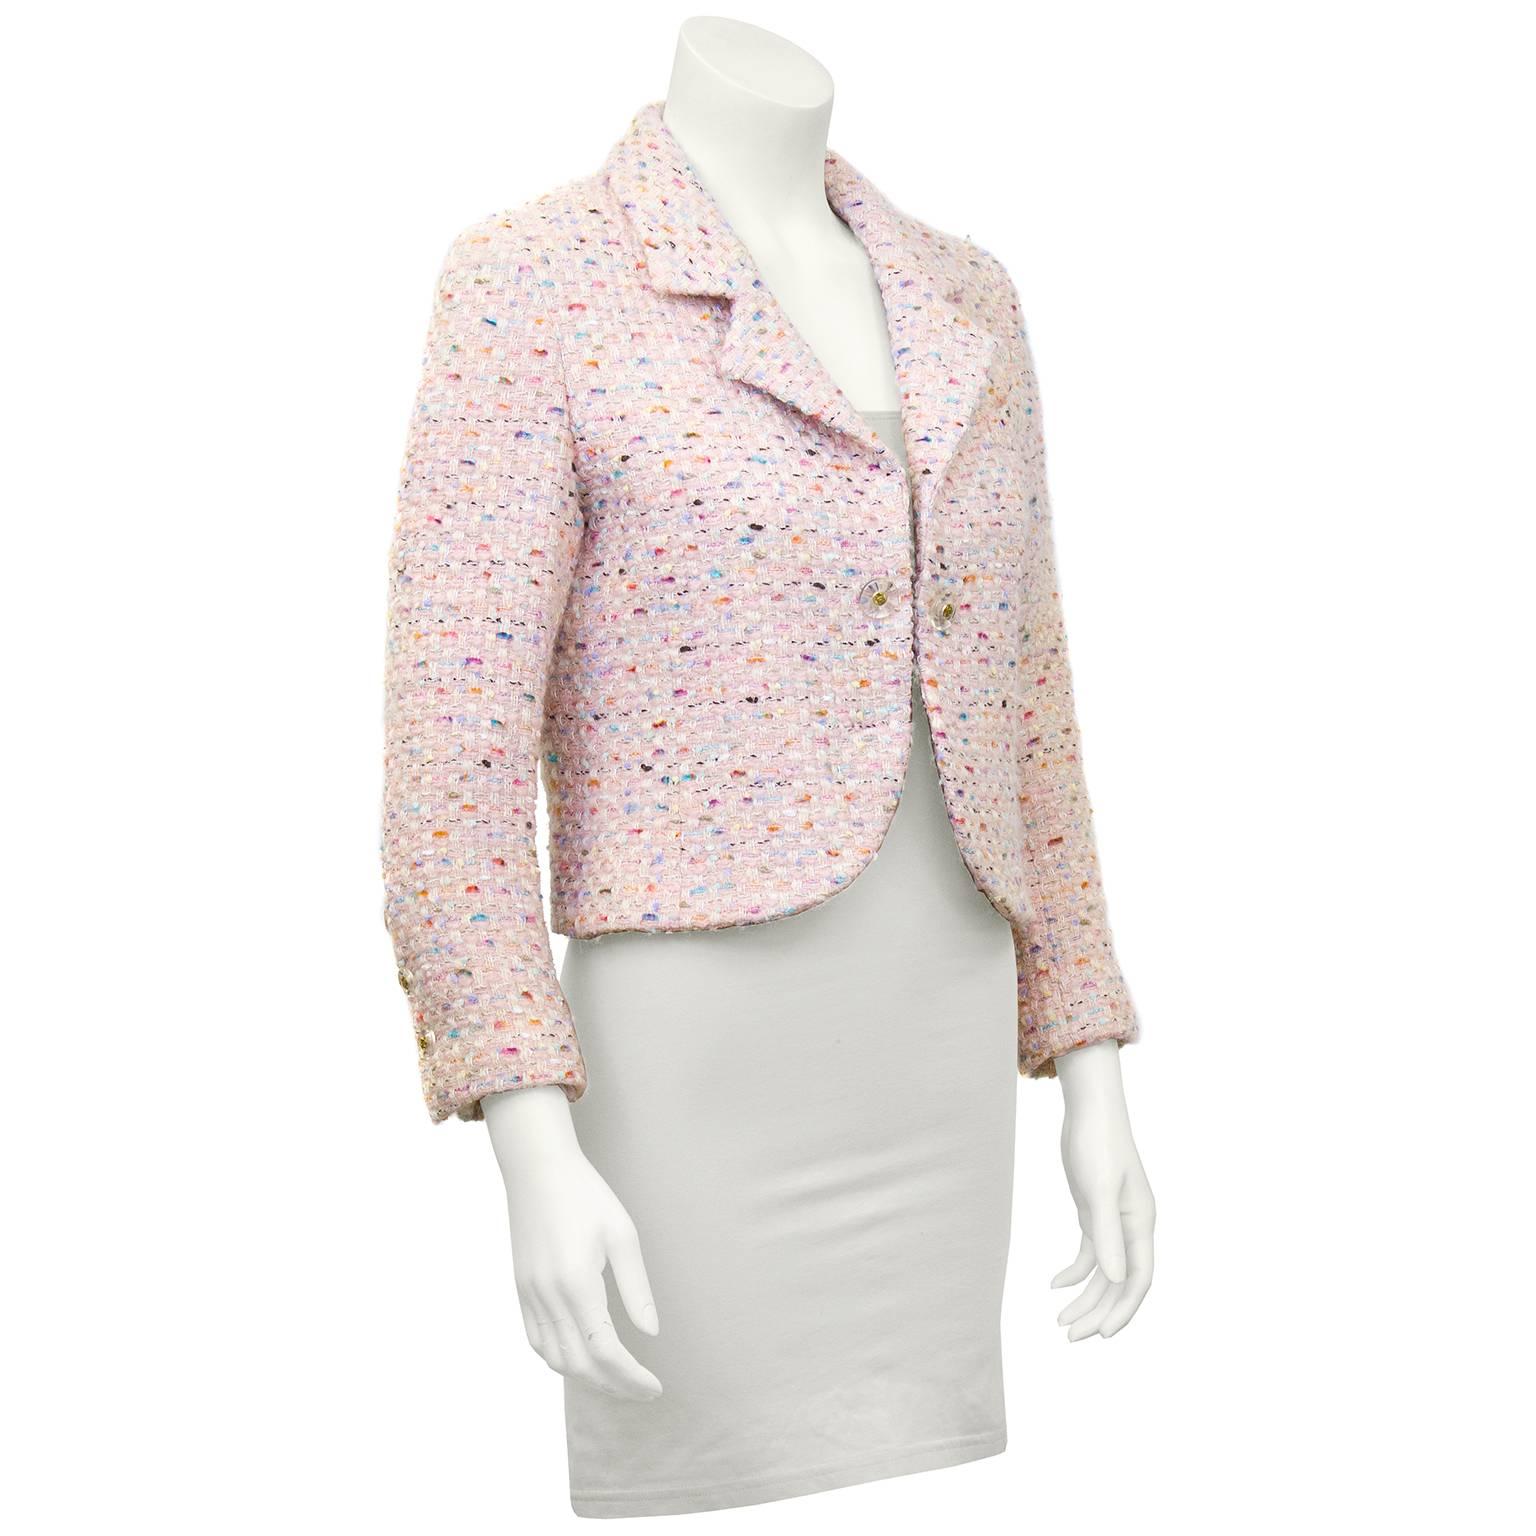 Cute and chic 1994 spring collection Chanel jacket in a beautiful boucle with shades of pink, orange, blue, and purple. Cropped with stunning lucite and gold CC buttons at front closure and wrists. The classic Chanel jacket in a fun and updated